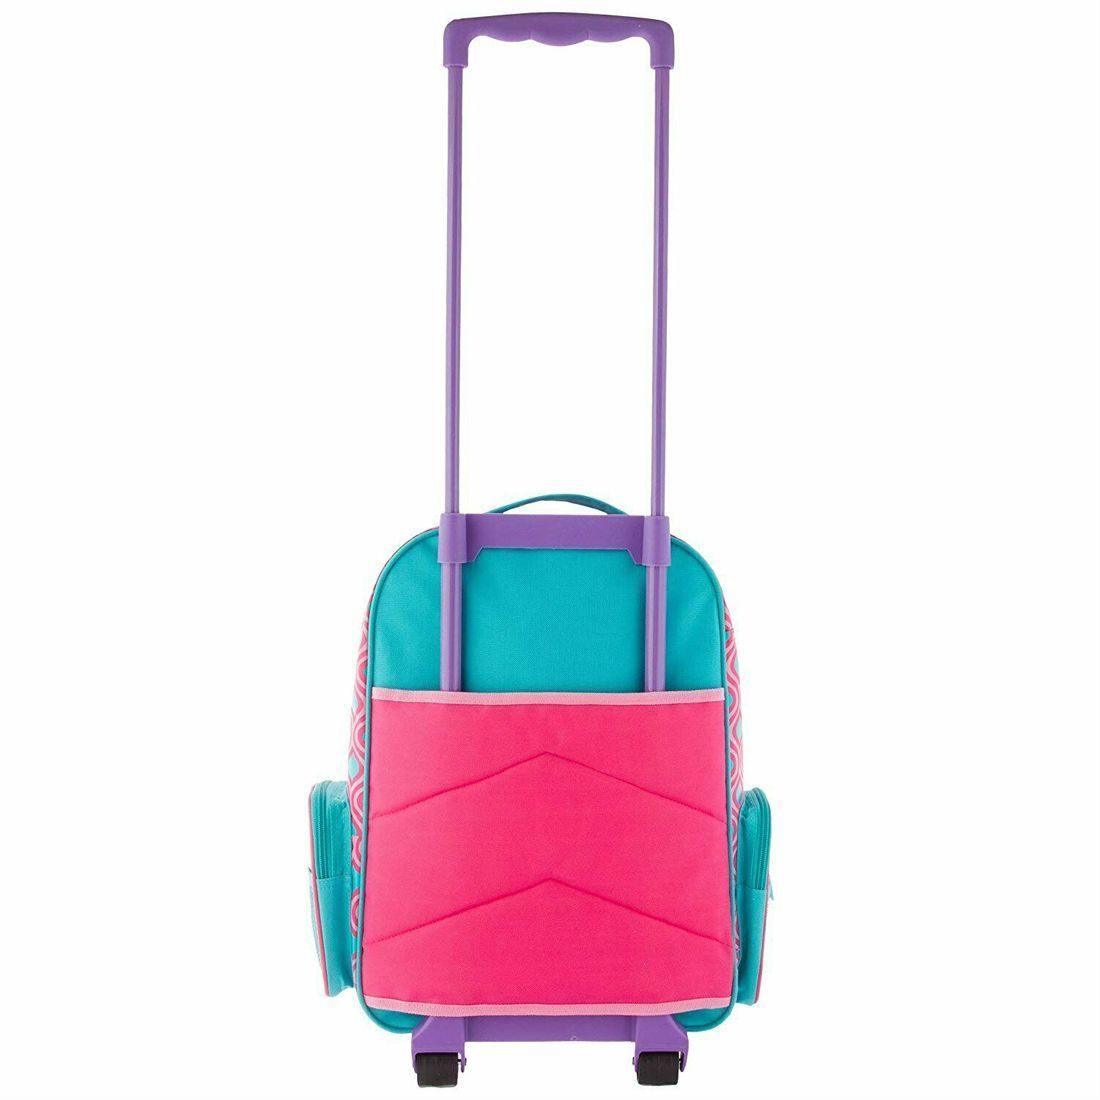 Stephen Joseph Classic Rolling Luggage 18 inch Mermaid - BumbleToys - 5-7 Years, Backpack, Cecil, Girls, Pre-Order, School Supplies, Stephen Joseph 2023